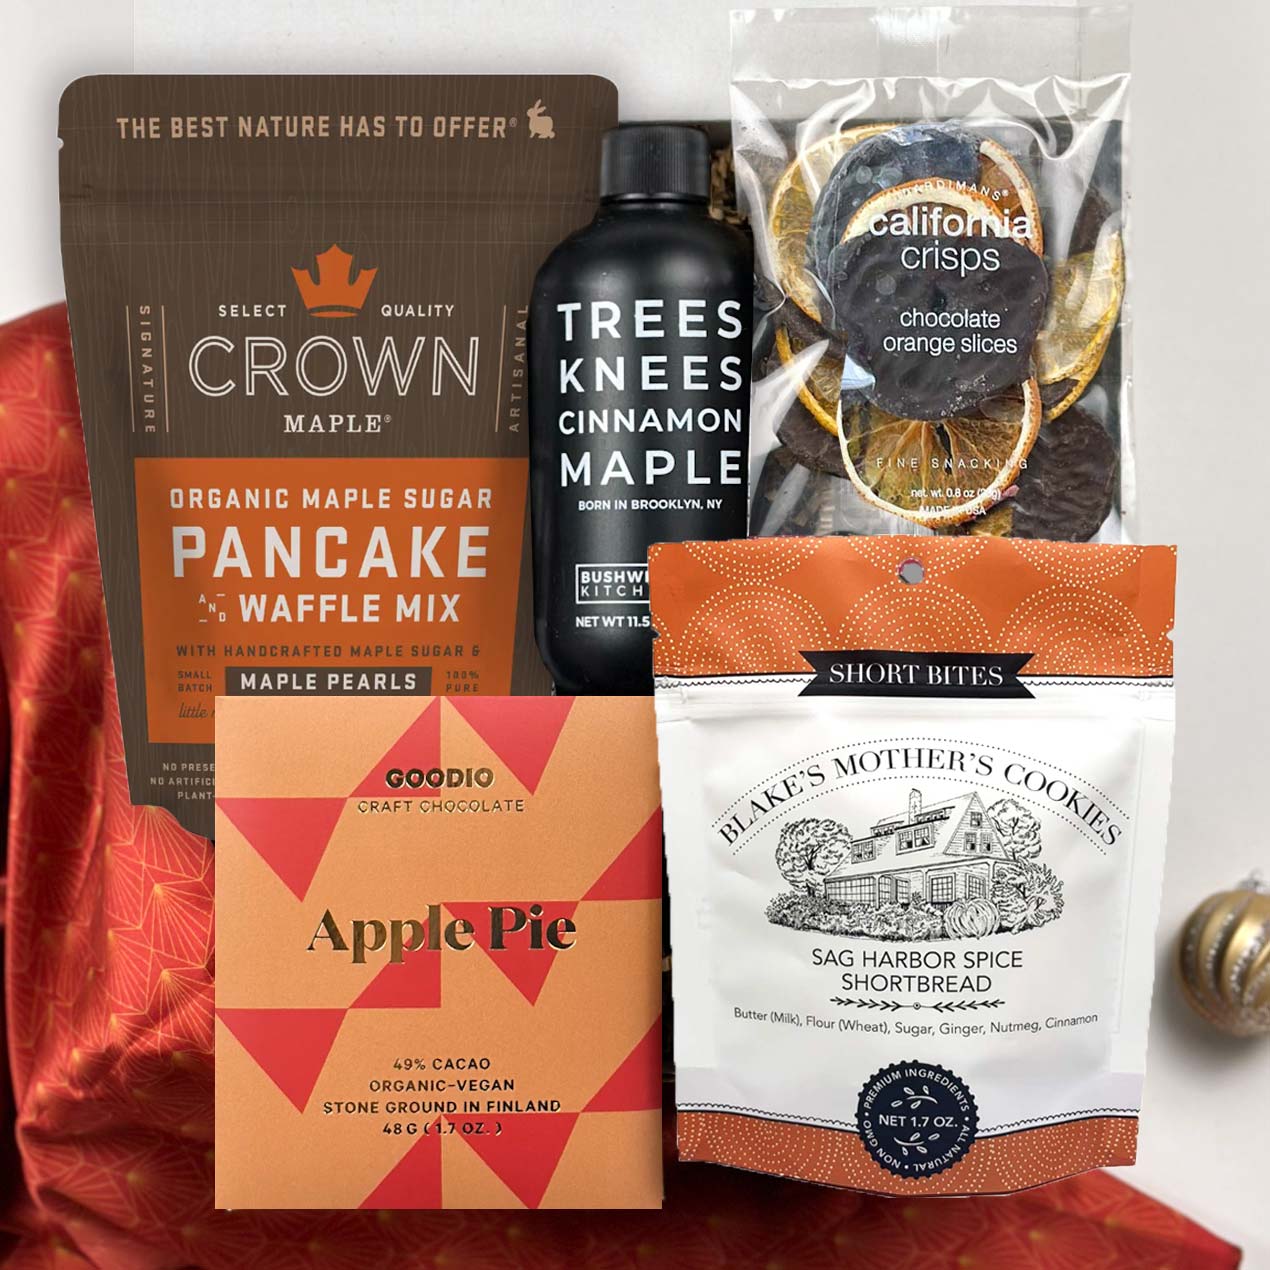 kadoo gourmet pancake holiday gift box with pancake & waffle mix, cinnamon maple syrup, apple pie chocolate, cookie and more